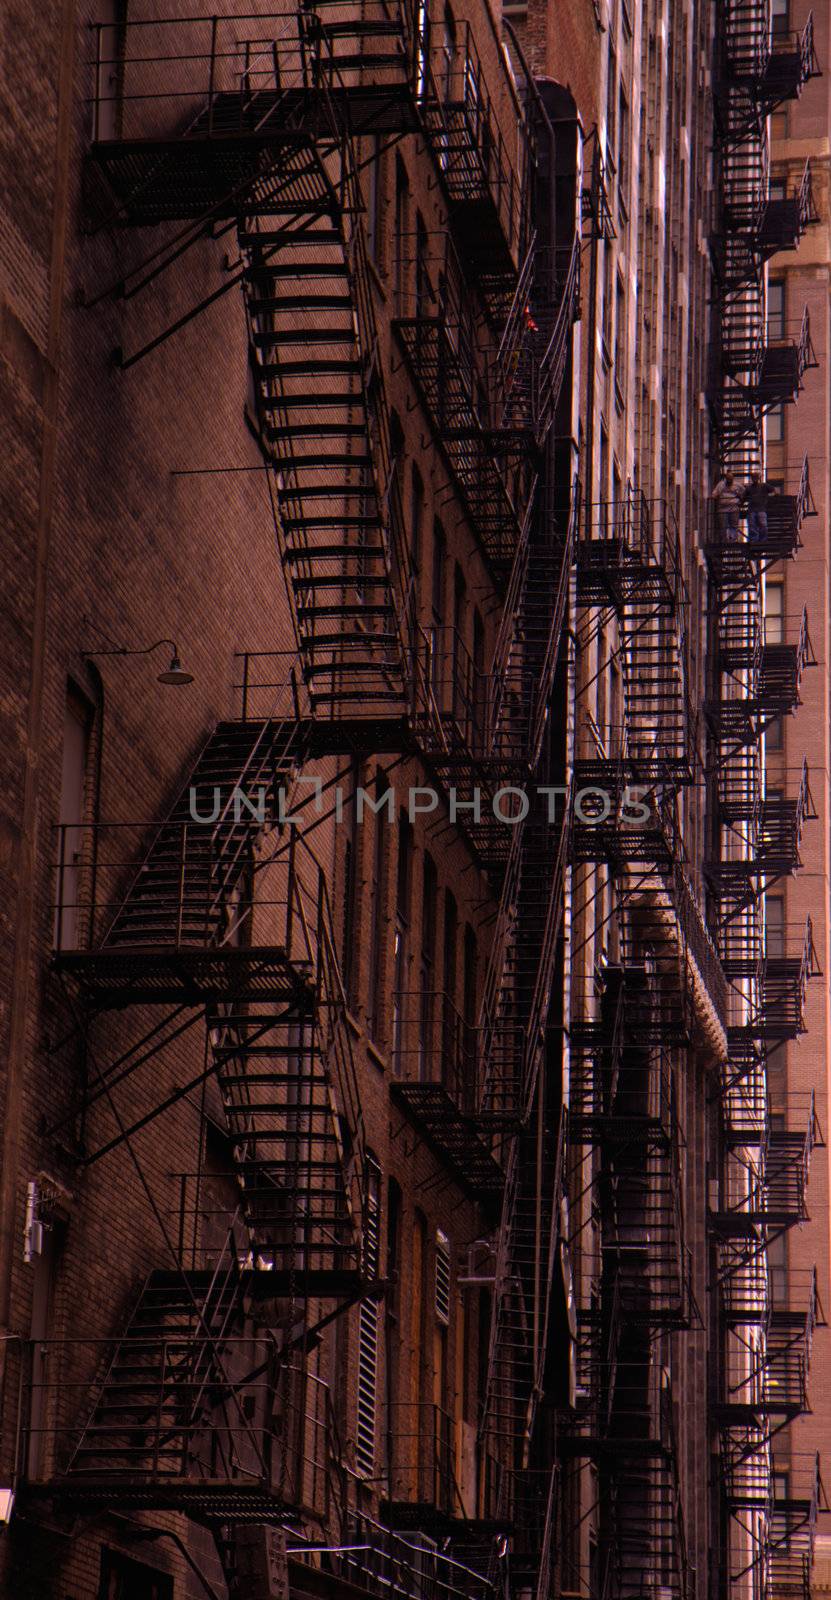 Chicago fire escape ladders in a dark alley